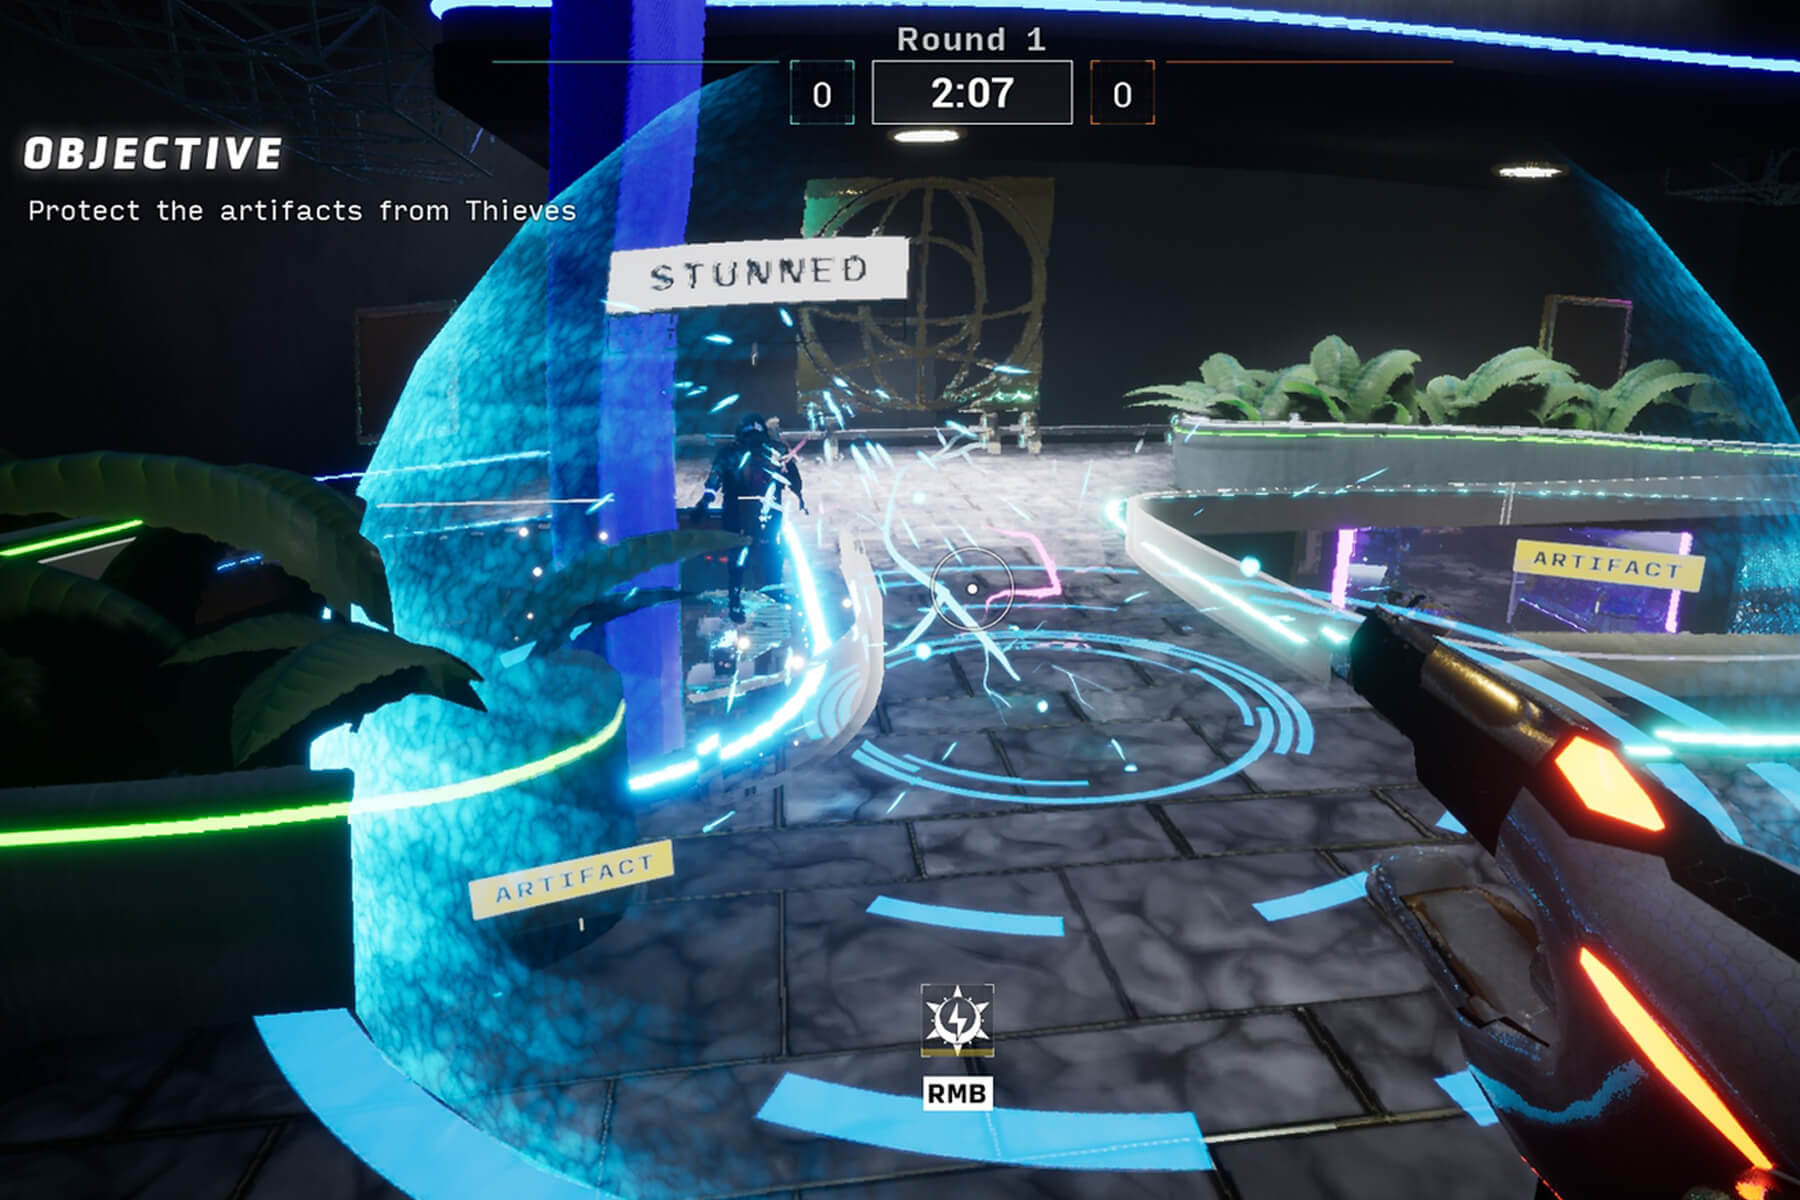 A screenshot from DigiPen student game Night Heist depicting the player stunning a thief trying to steal an artifact.